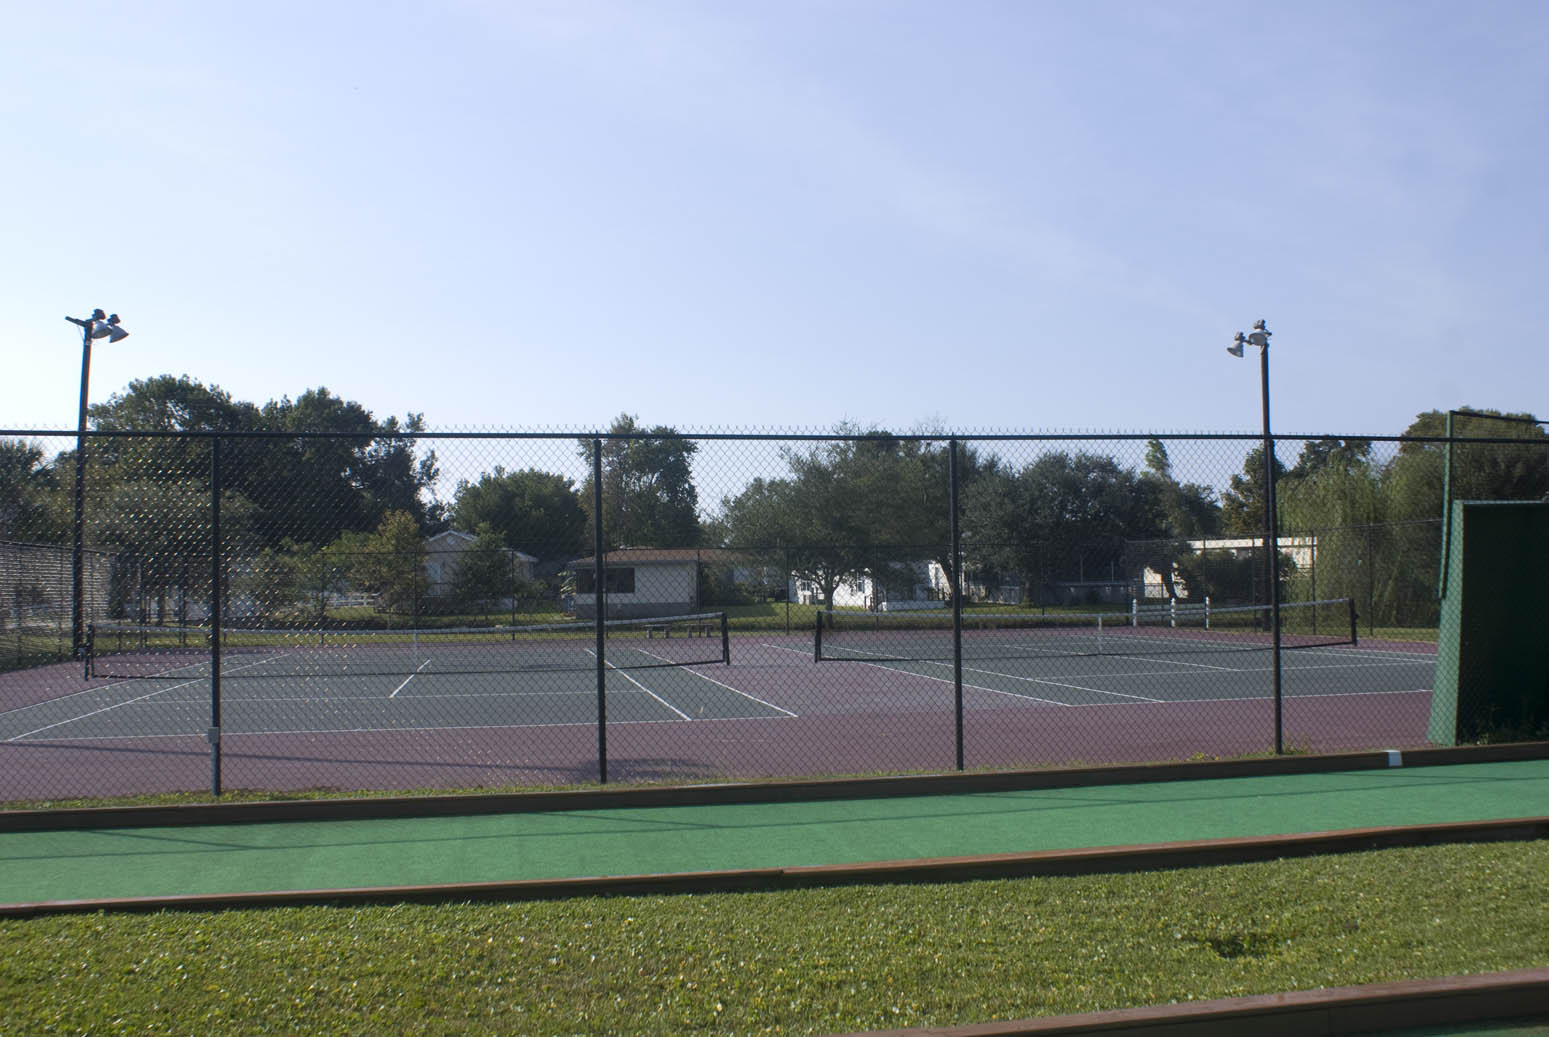 Tennis Courts free for use!